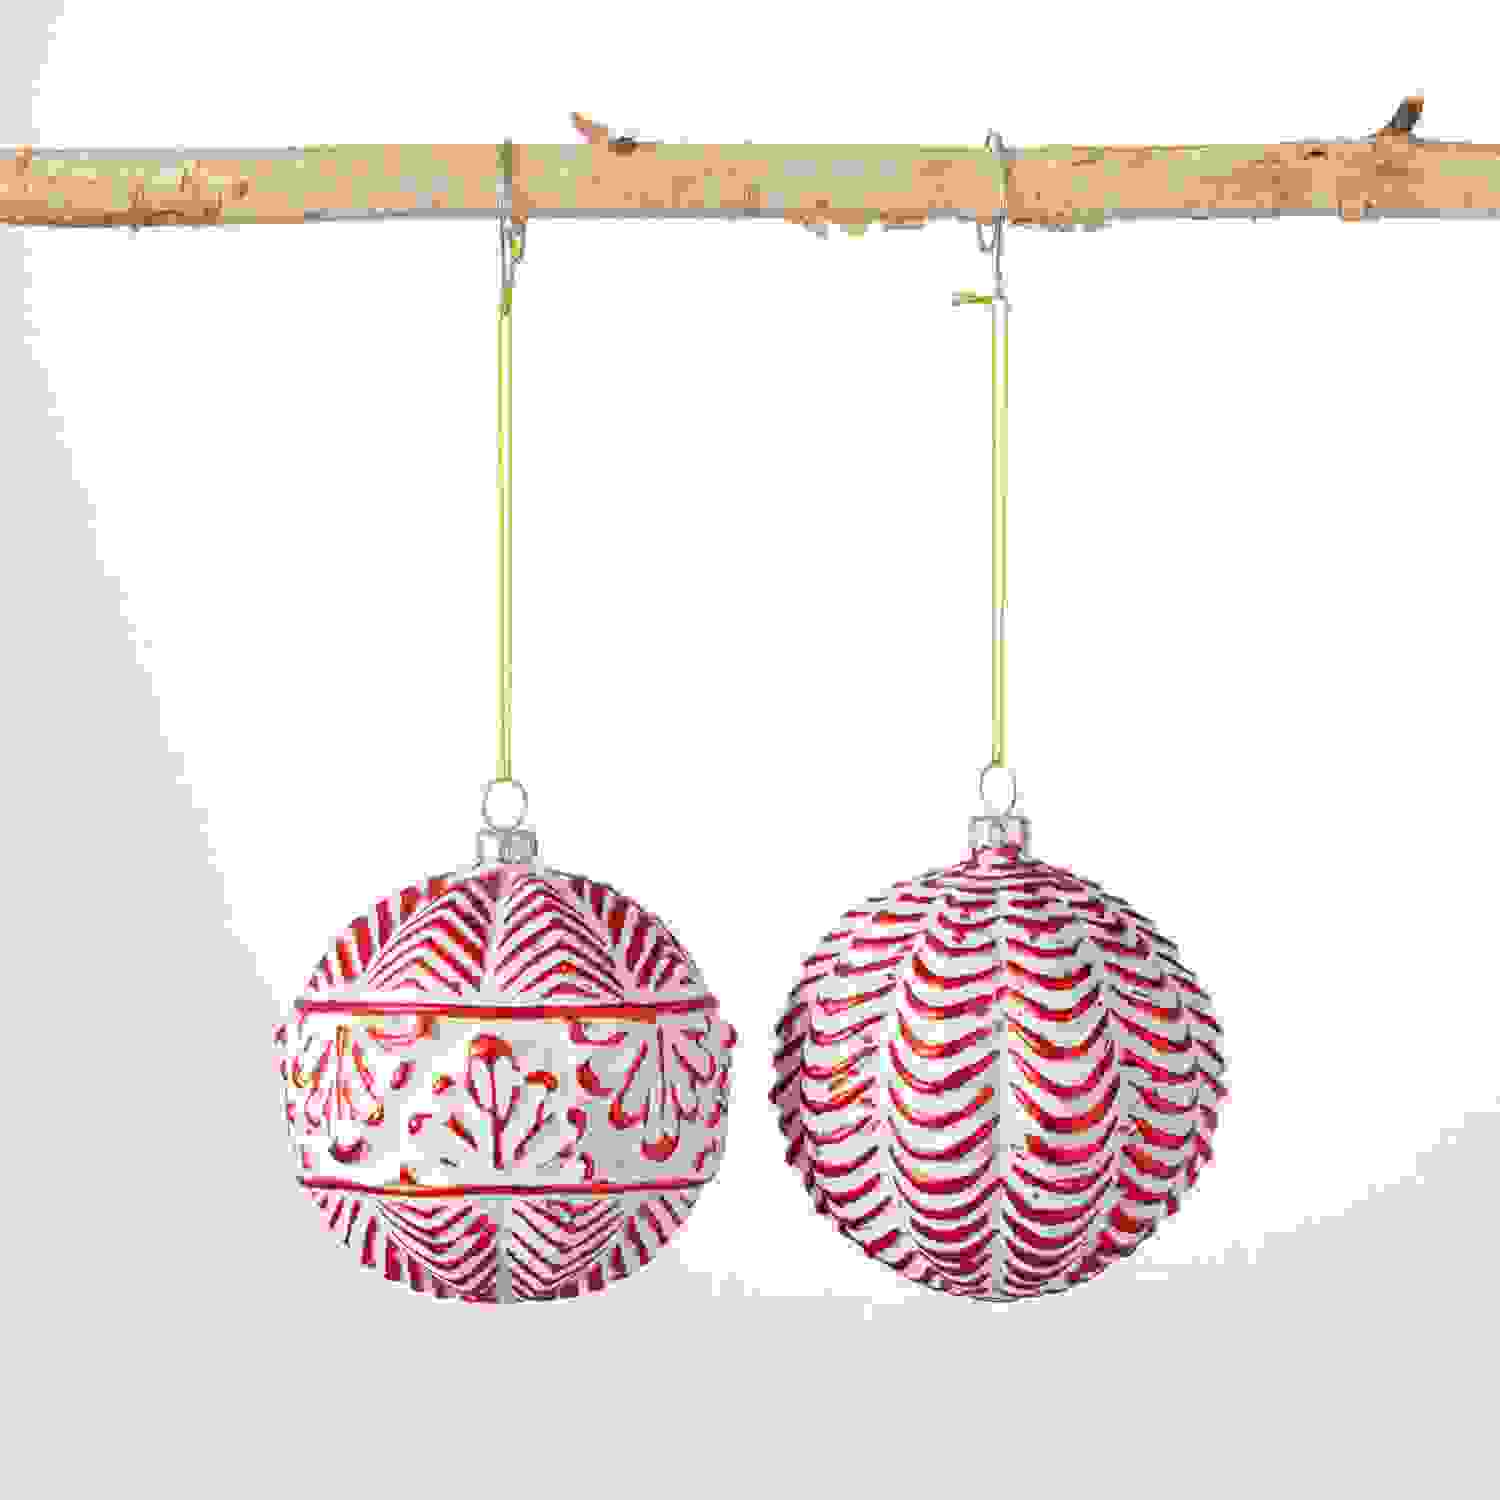 RED EMBOSSED BALL ORNAMENT SET